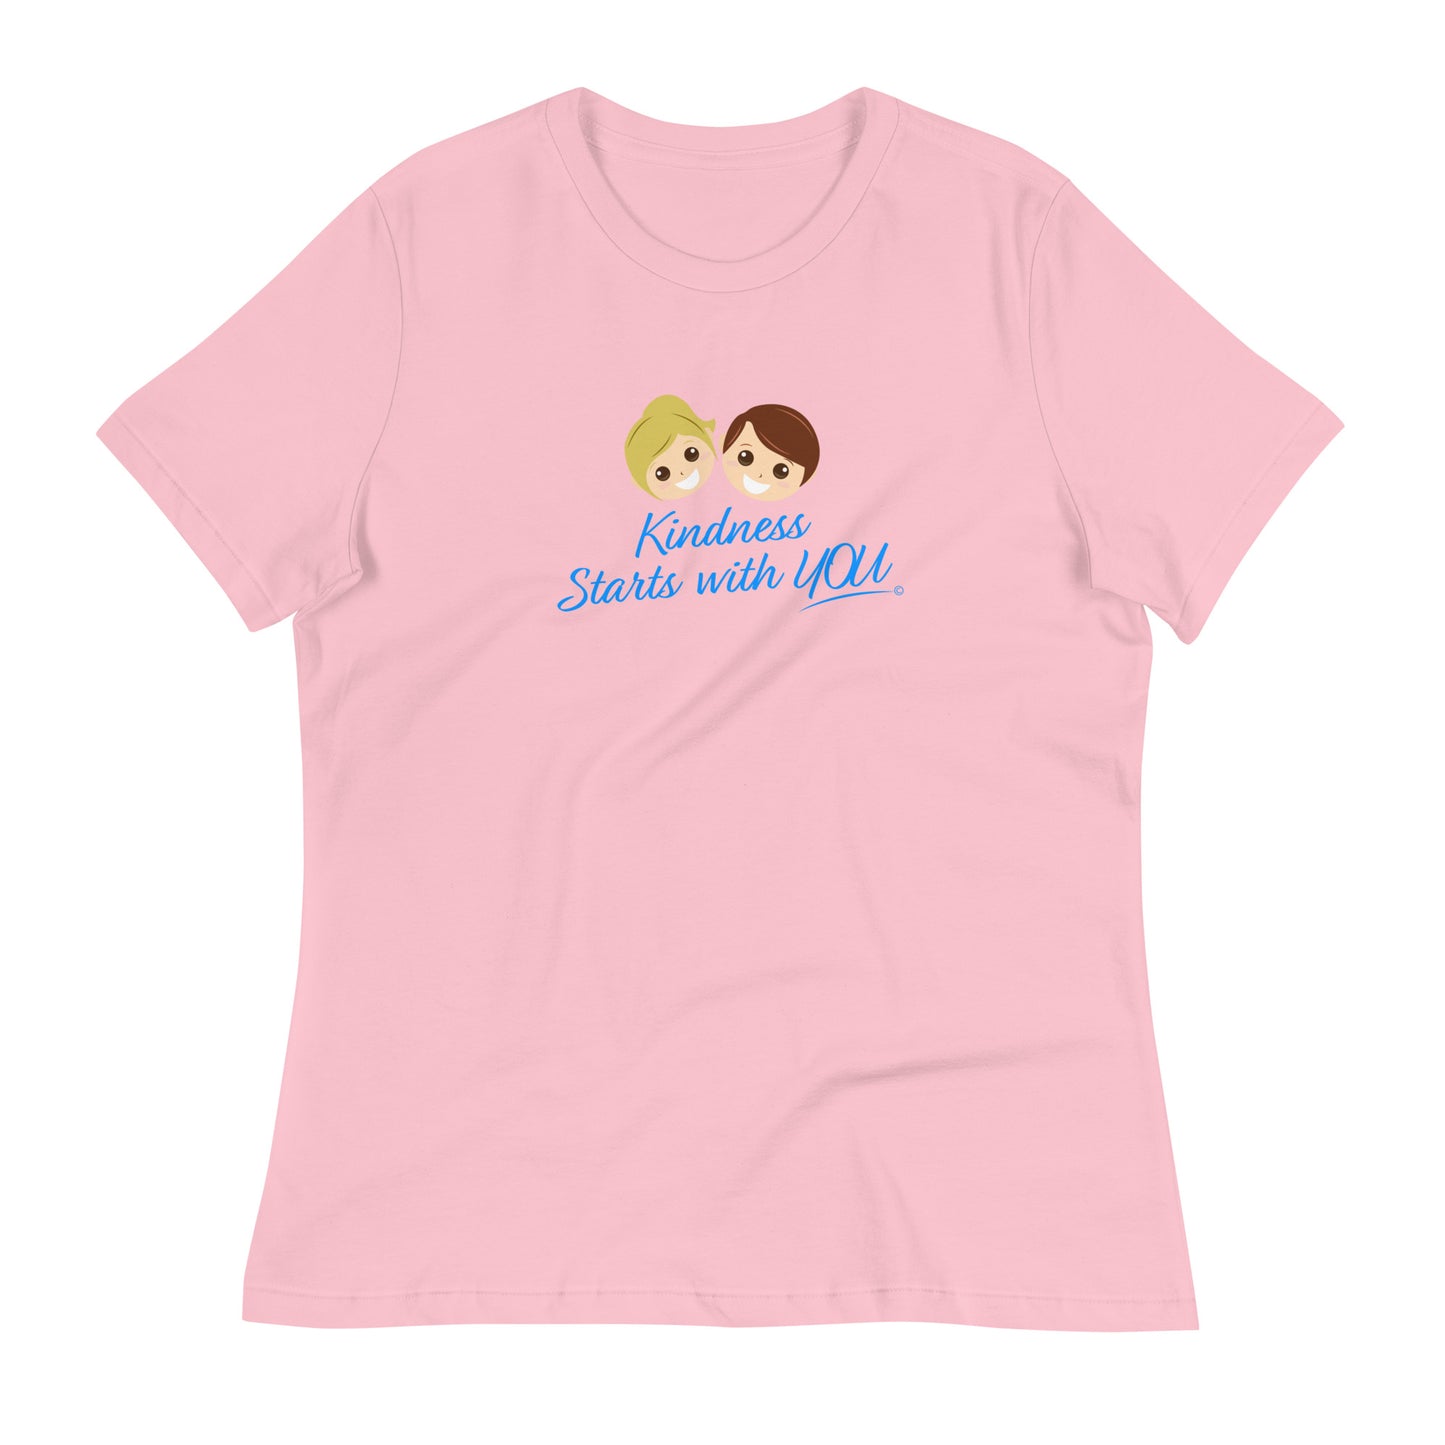 A stylish women's shirt in pink, featuring the empowering quote 'Kindness Starts with You' in bold lettering.